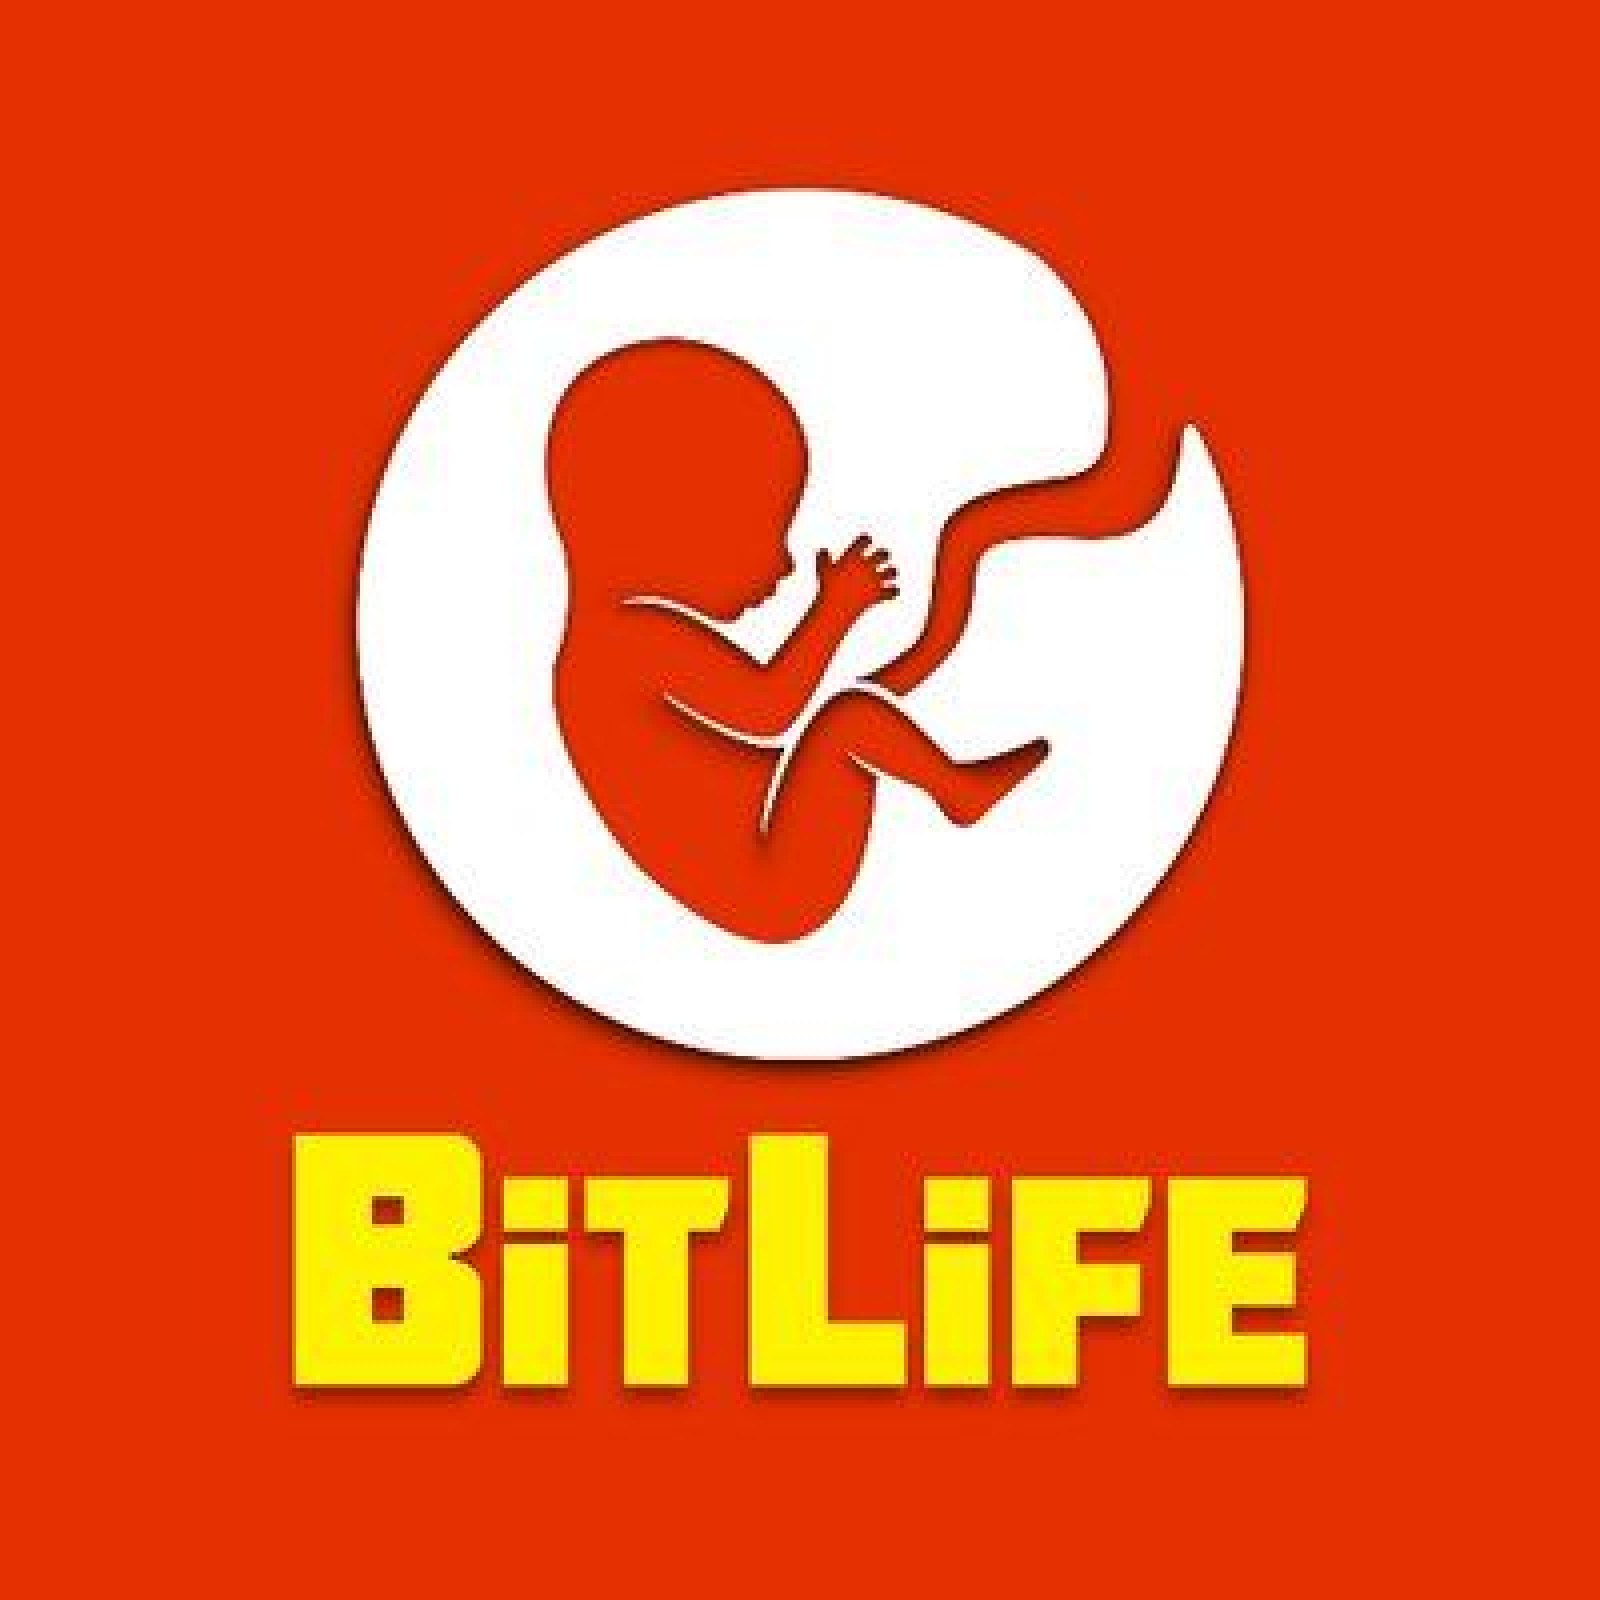 Turn Over Master - Play Turn Over Master On Bitlife